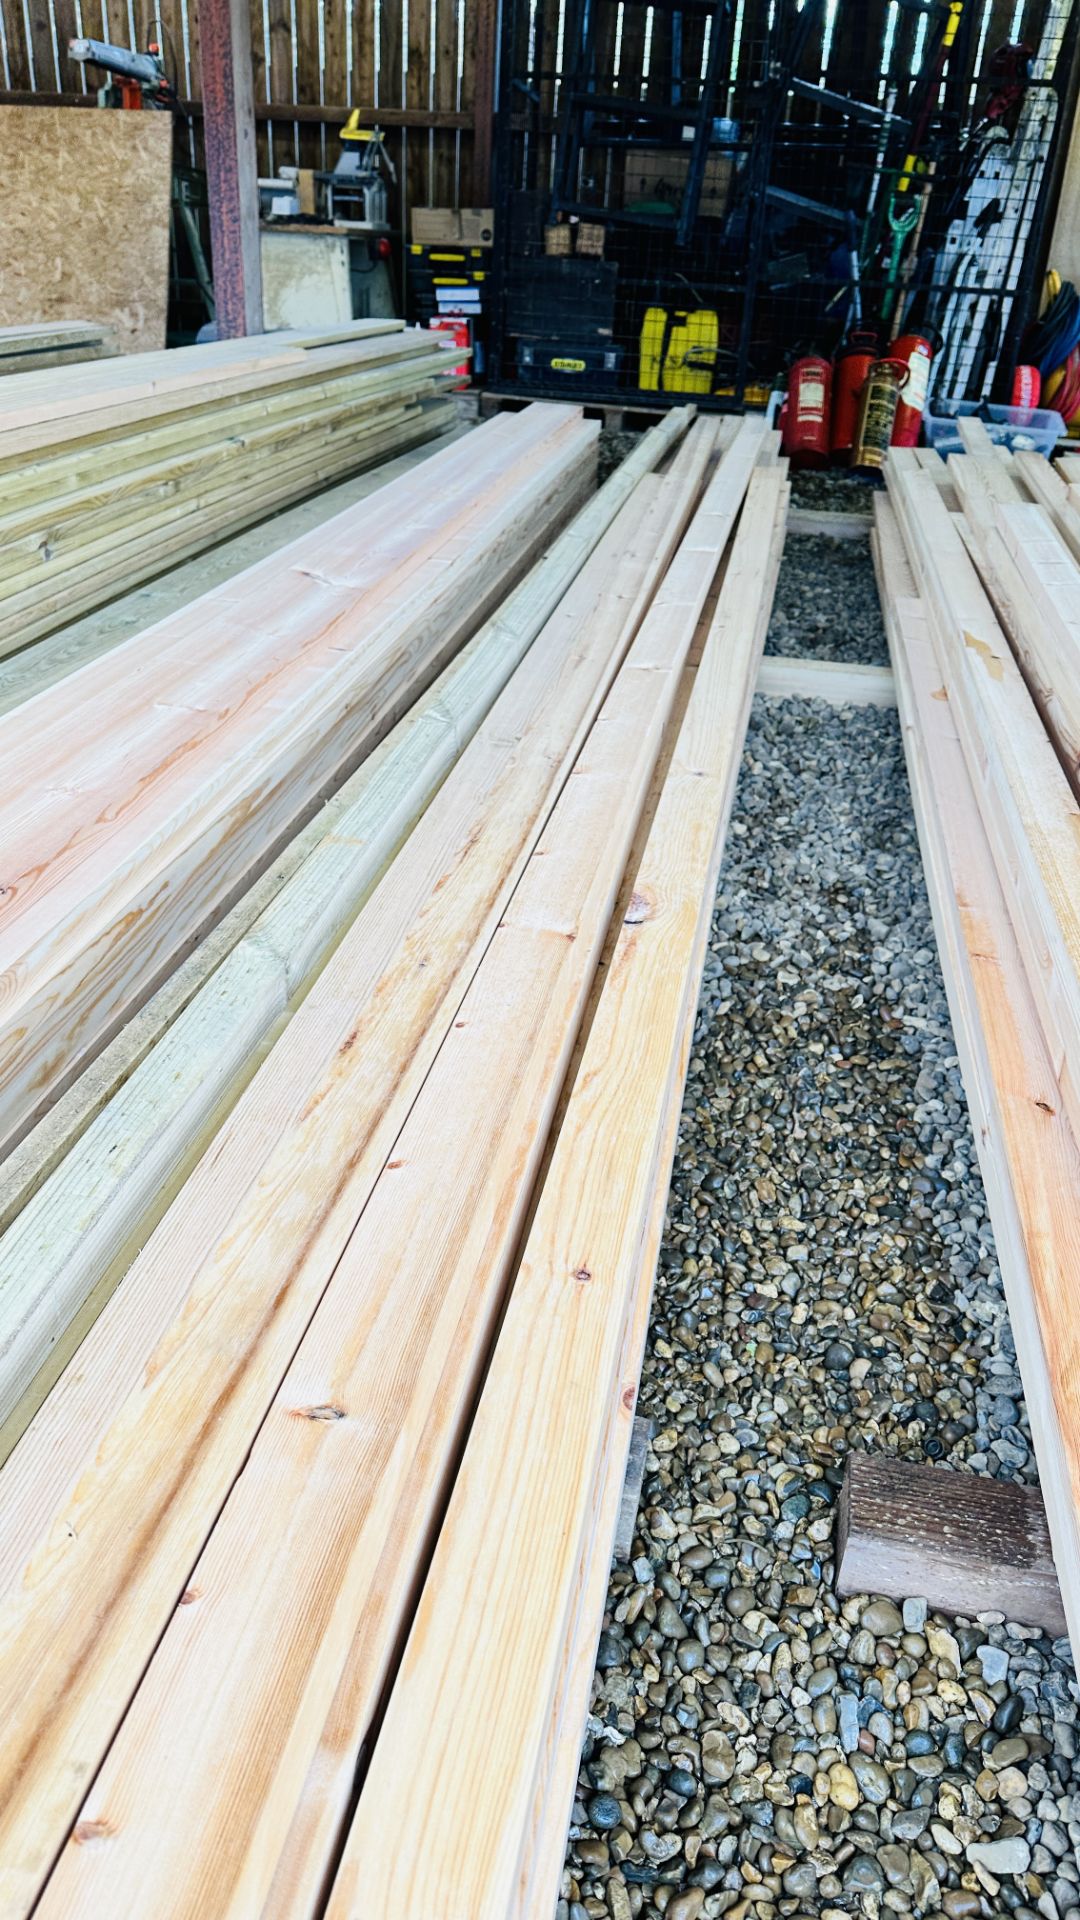 26 X 70MM X 35MM PLANED TIMBER, MINIMUM LENGTH APPROX 3.6 METRE, MAXIMUM APPROX LENGTH 5. - Image 4 of 4